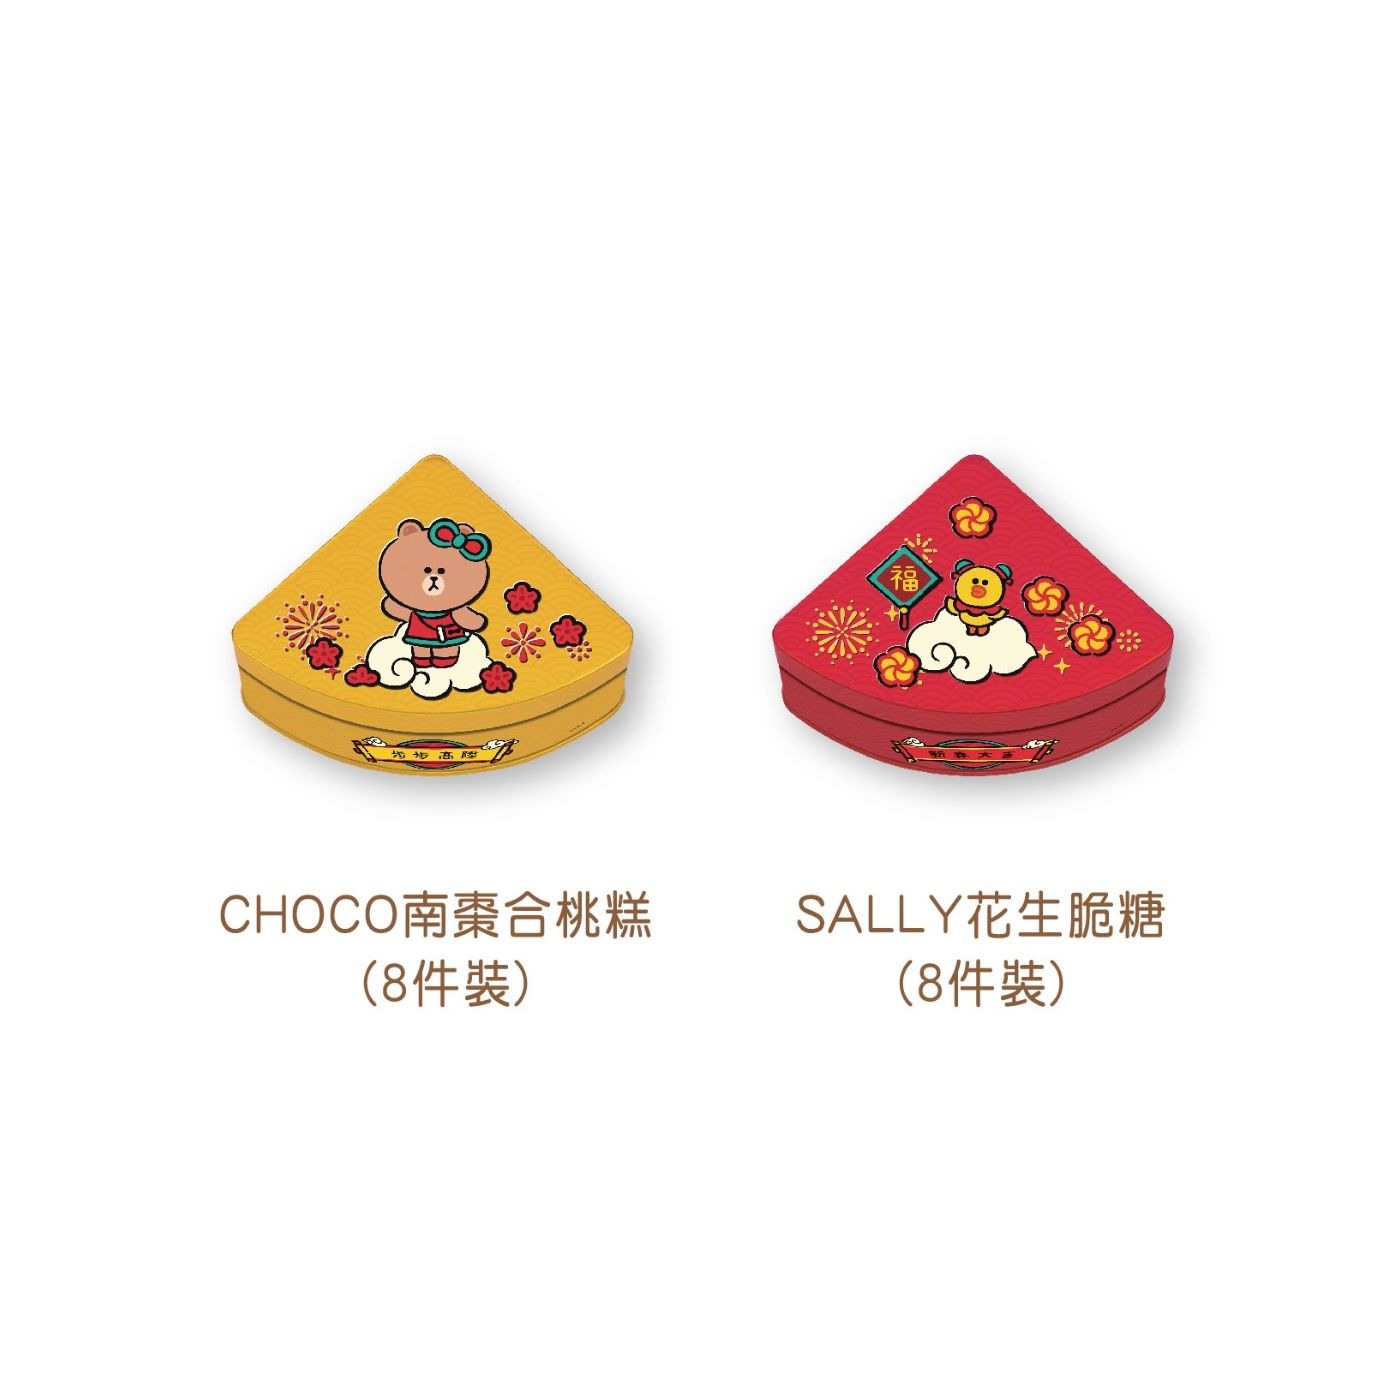 LINE FRIENDS WITH KEE WAH BAKERY糖果禮盒